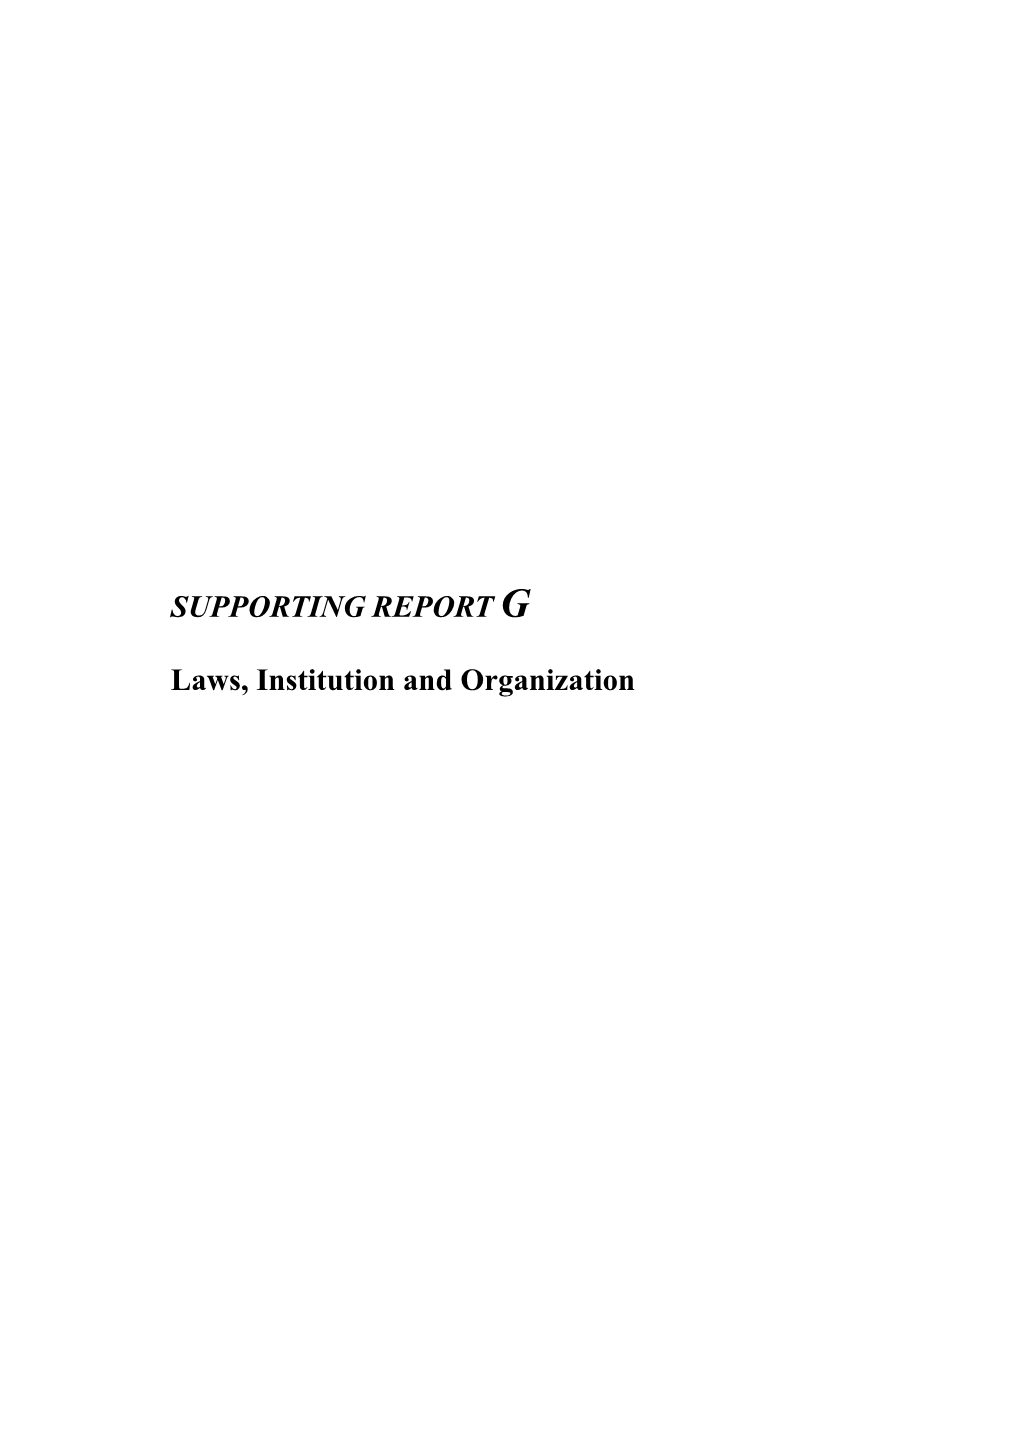 SUPPORTING REPORT G Laws, Institution and Organization